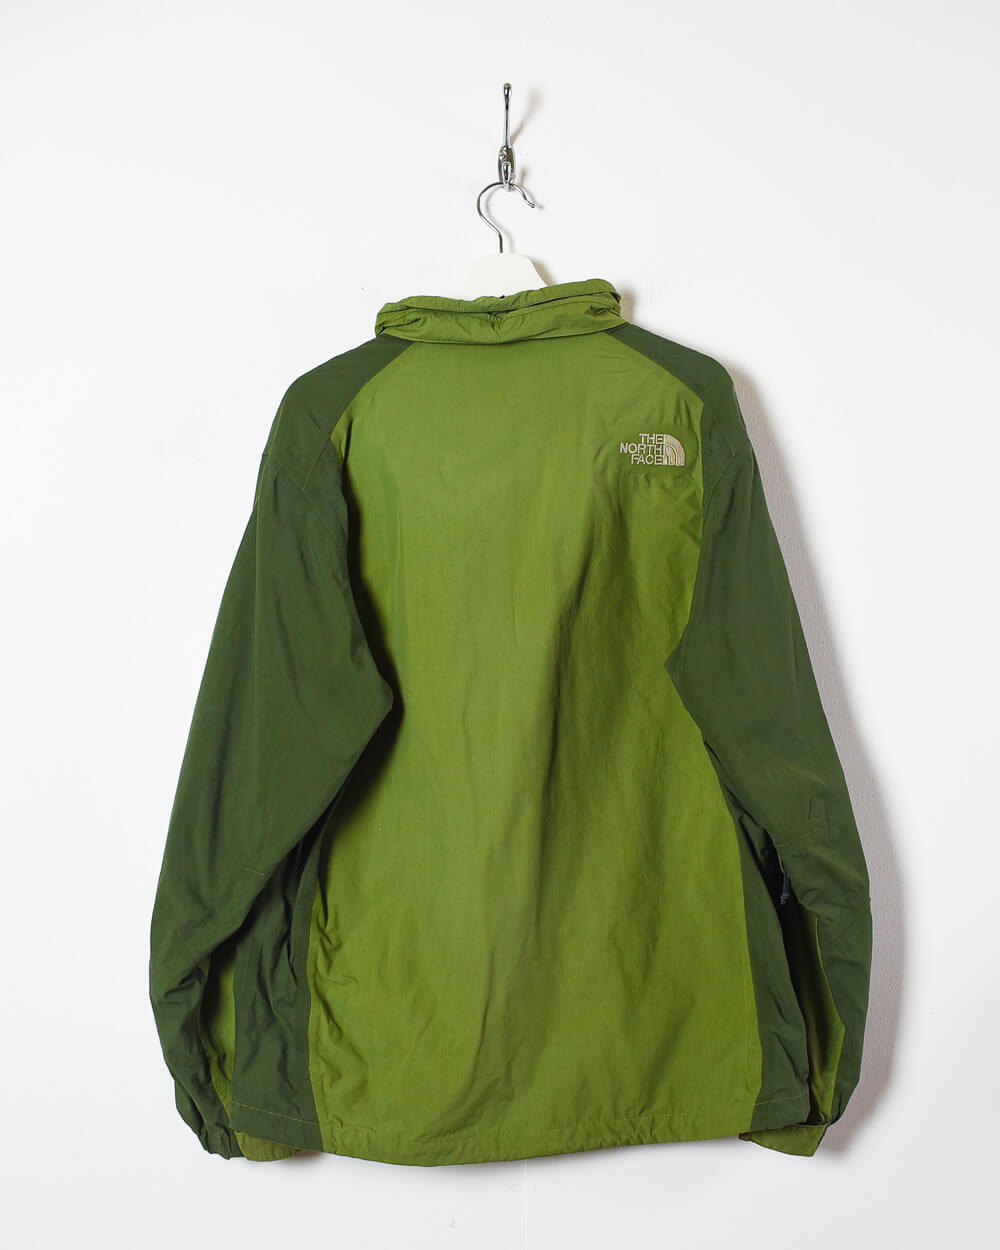 Green The North Face Jacket - Large